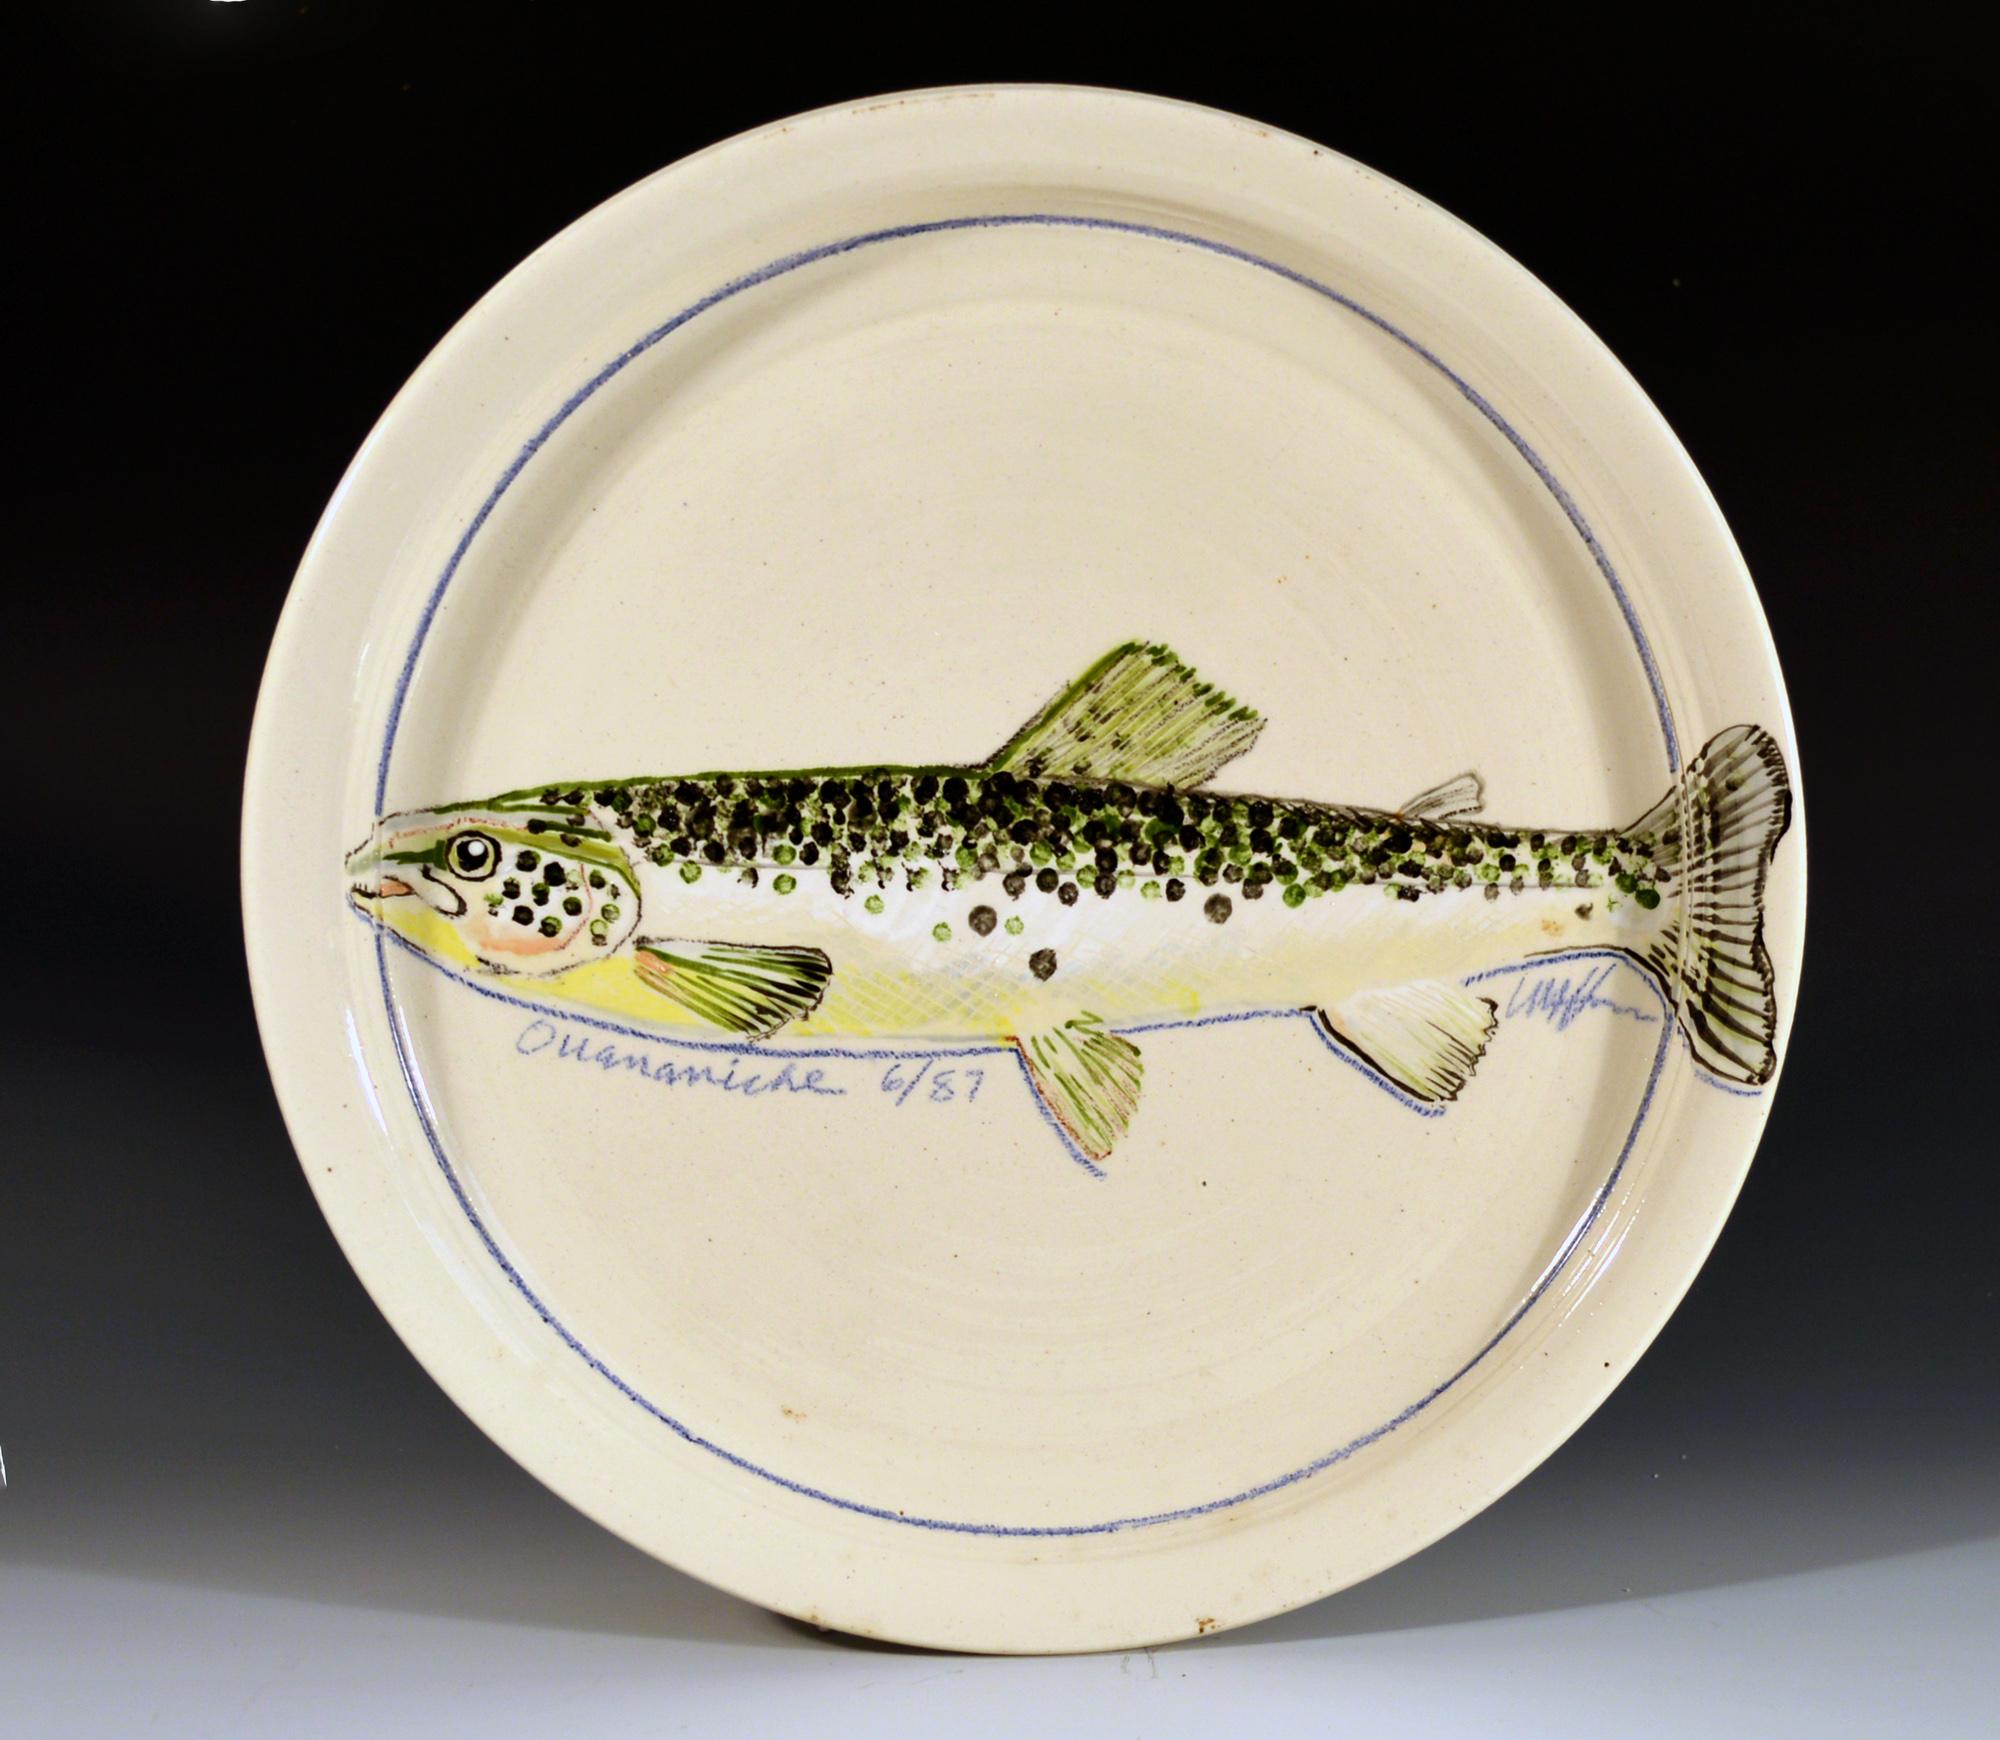 Earthenware Carole Harman Ceramic Dishes Painted with Fish, Arctic Char & Ouananiche Salmon For Sale